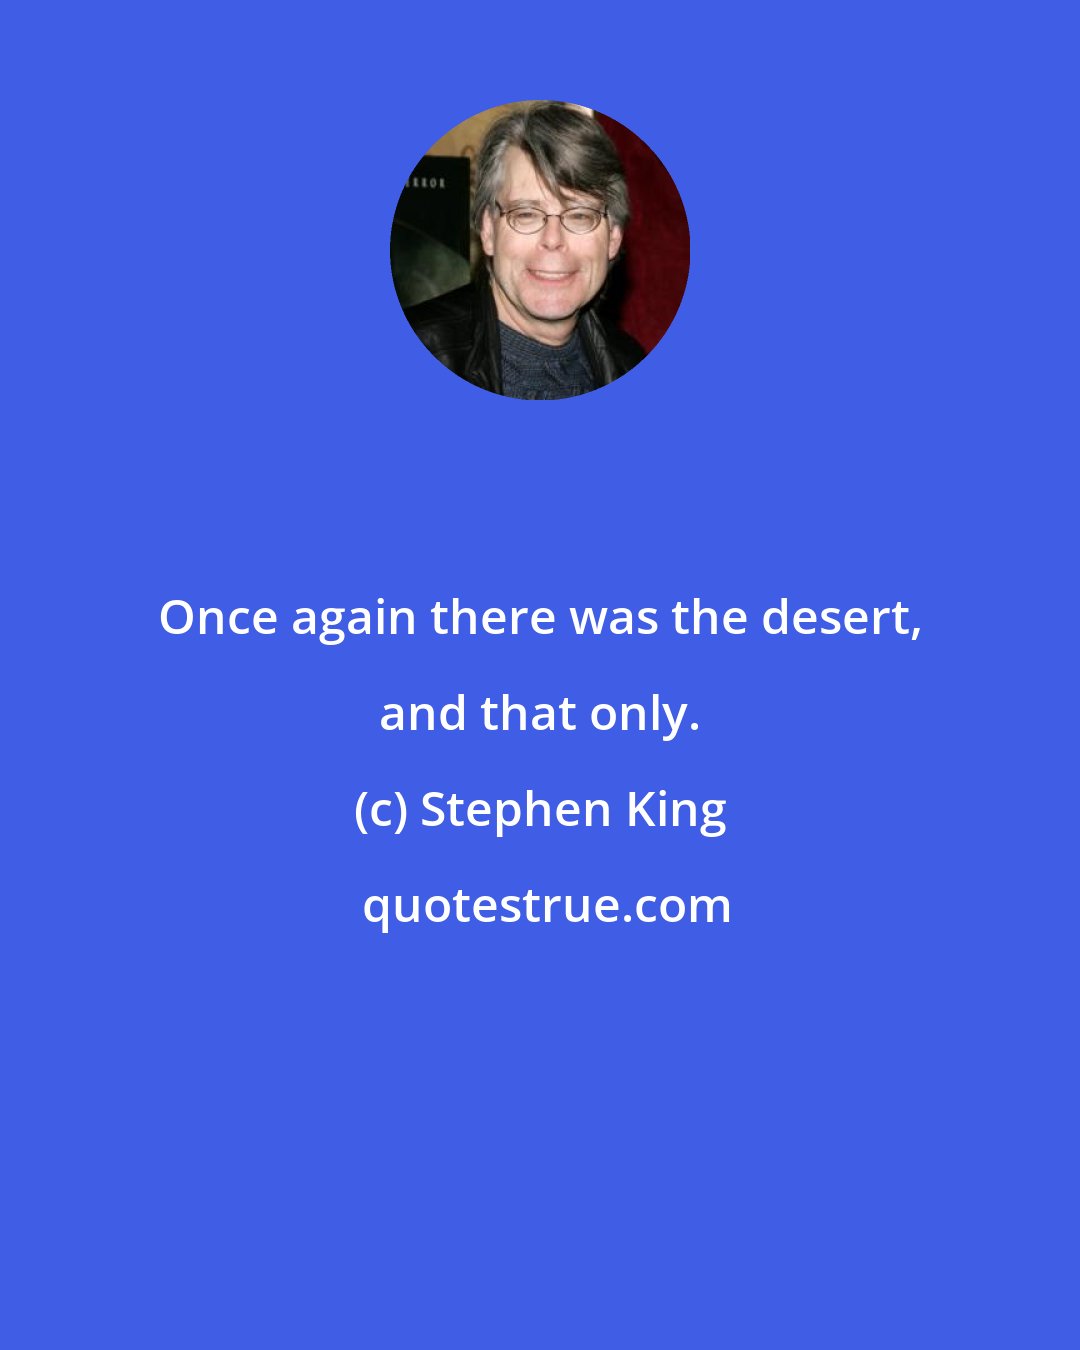 Stephen King: Once again there was the desert, and that only.